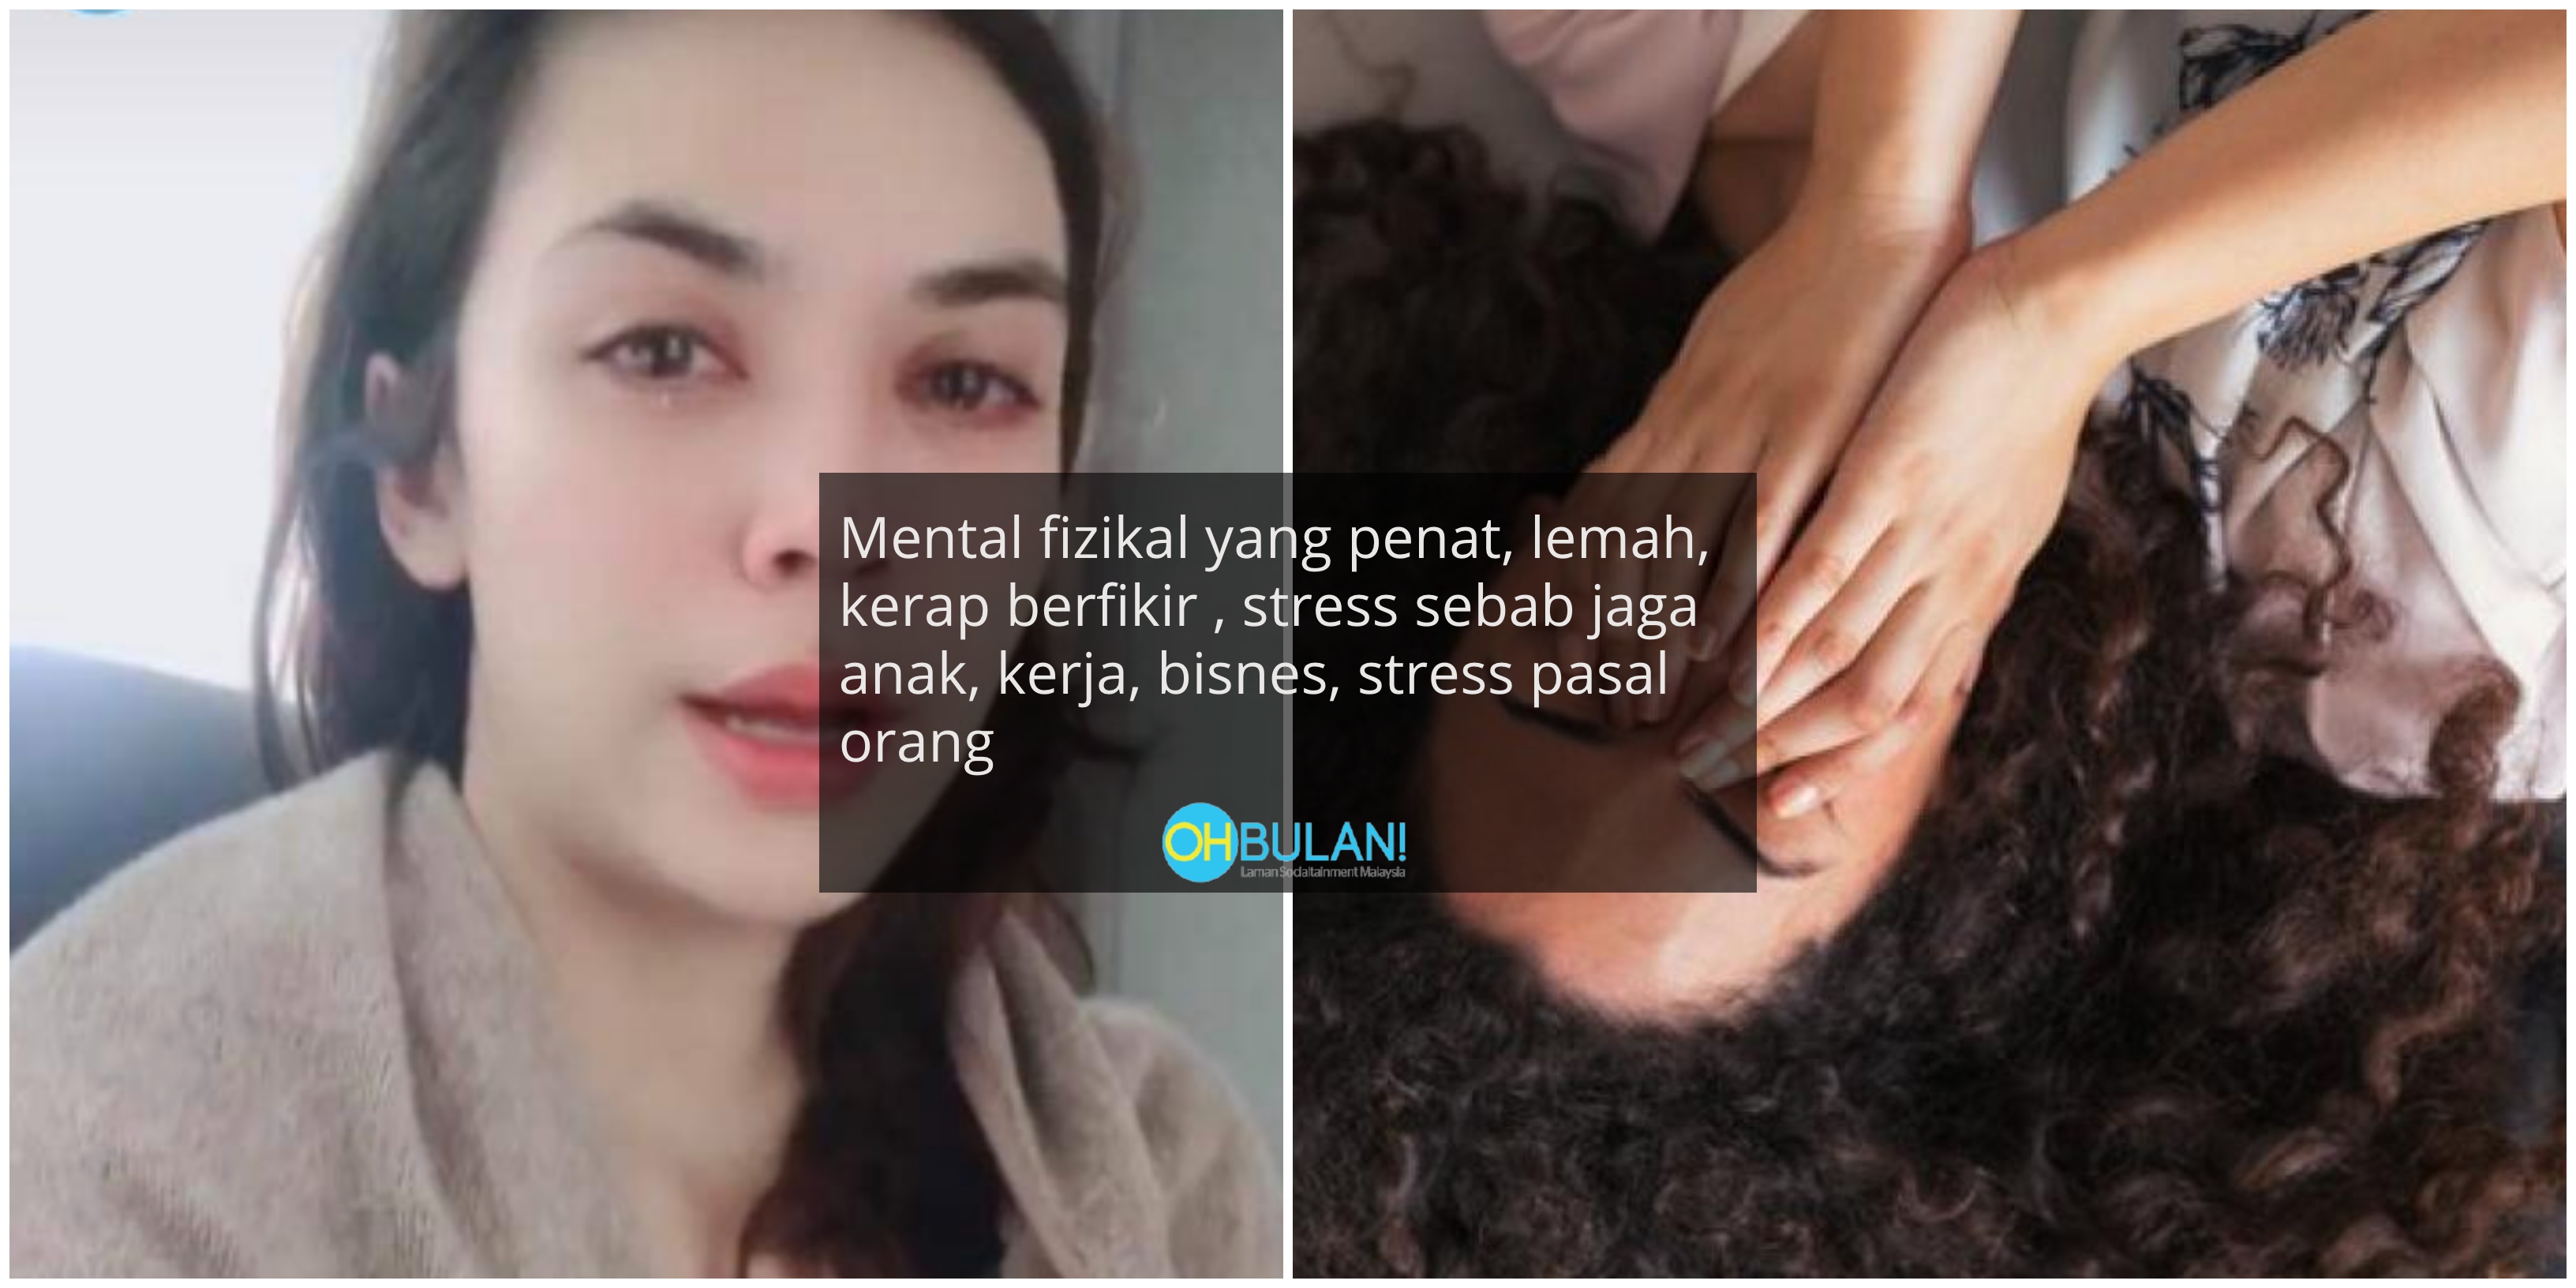 Anxiety in malay